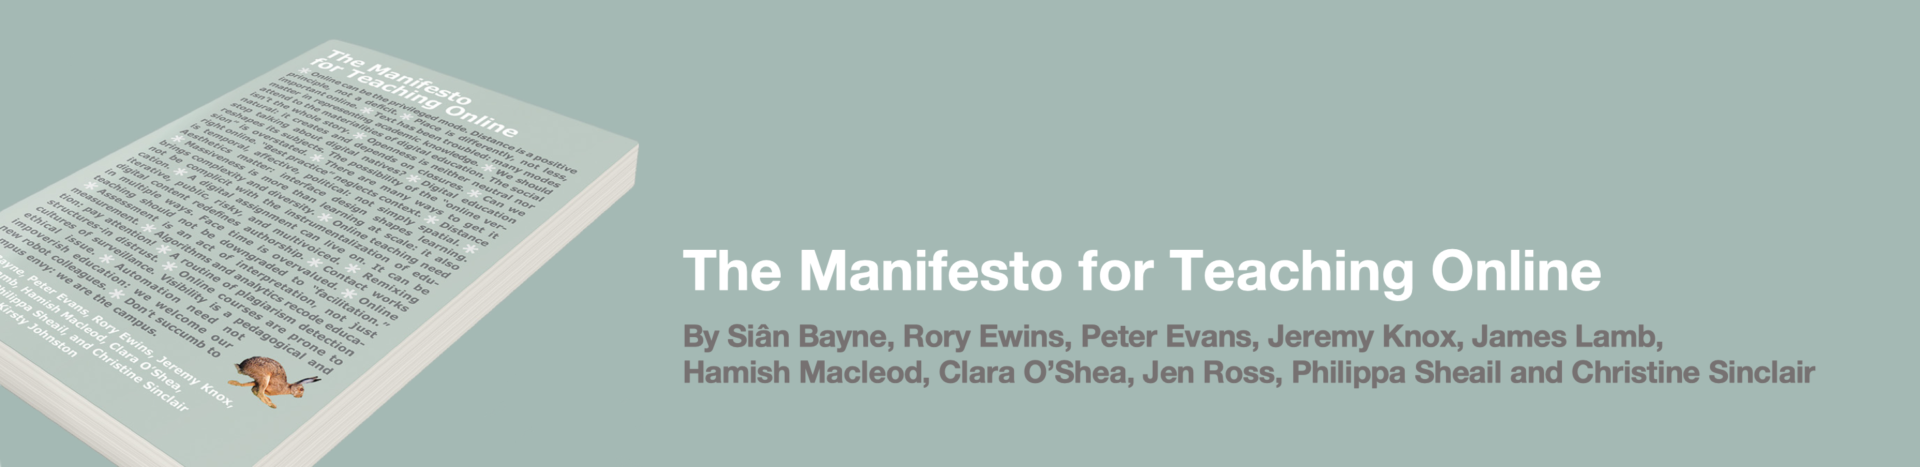 infolit ischool manifesto event in Second Life, Tuesday 13 November – all are welcome